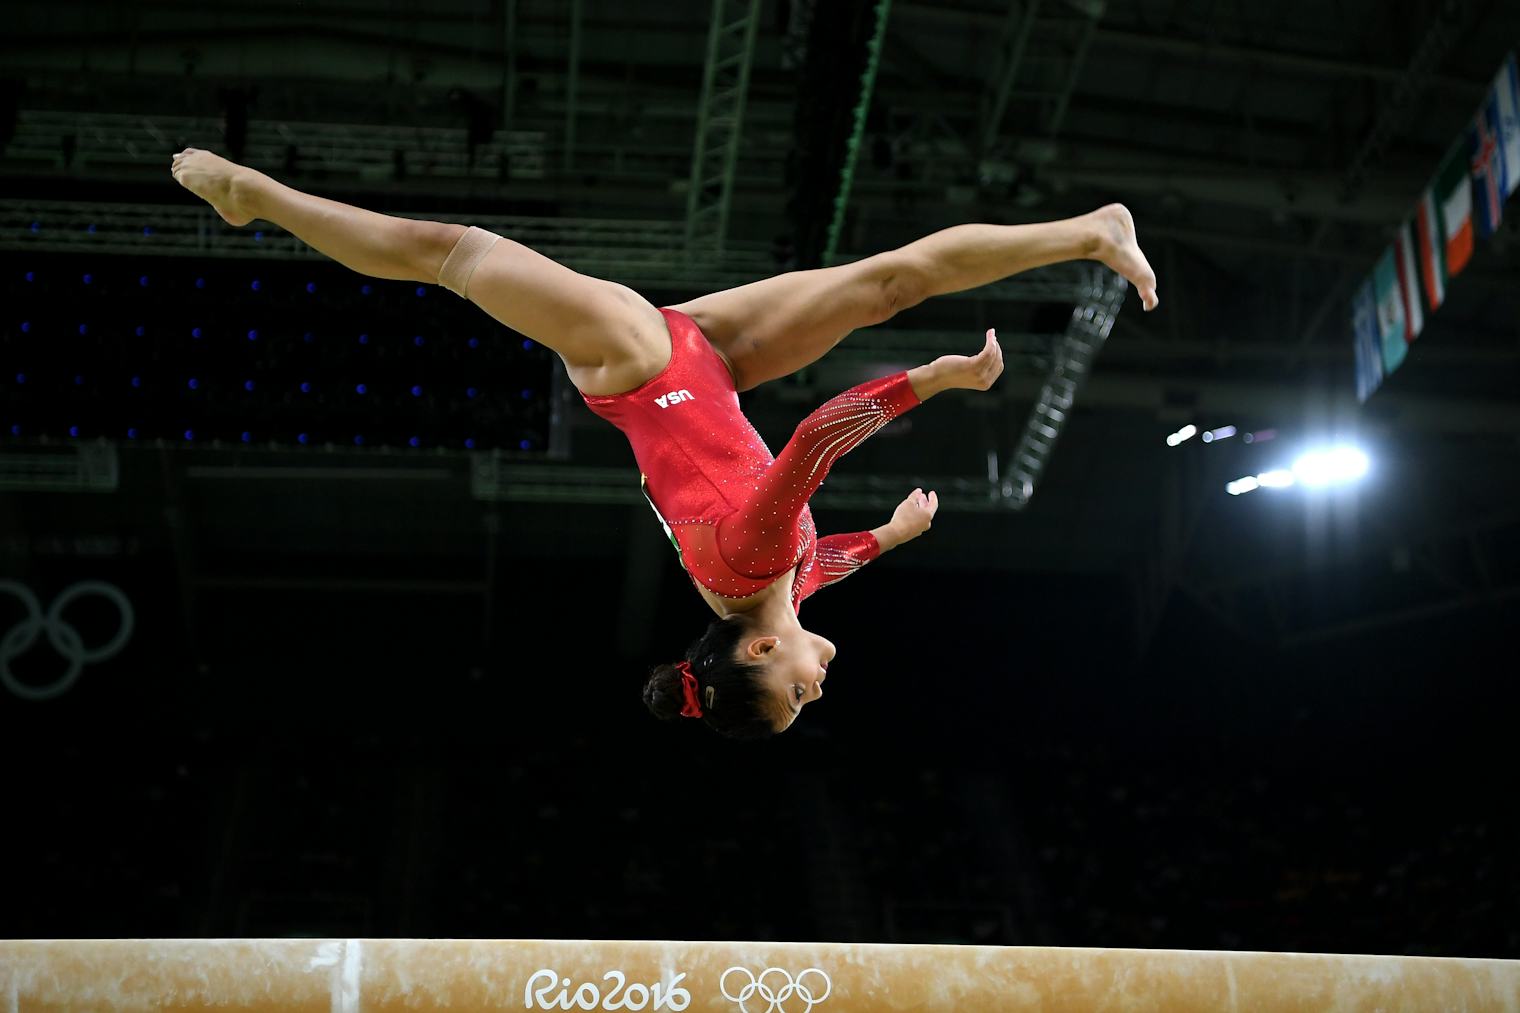 What Is A Gymnastics Inquiry Laurie Hernandez Asked For A Breakdown Of